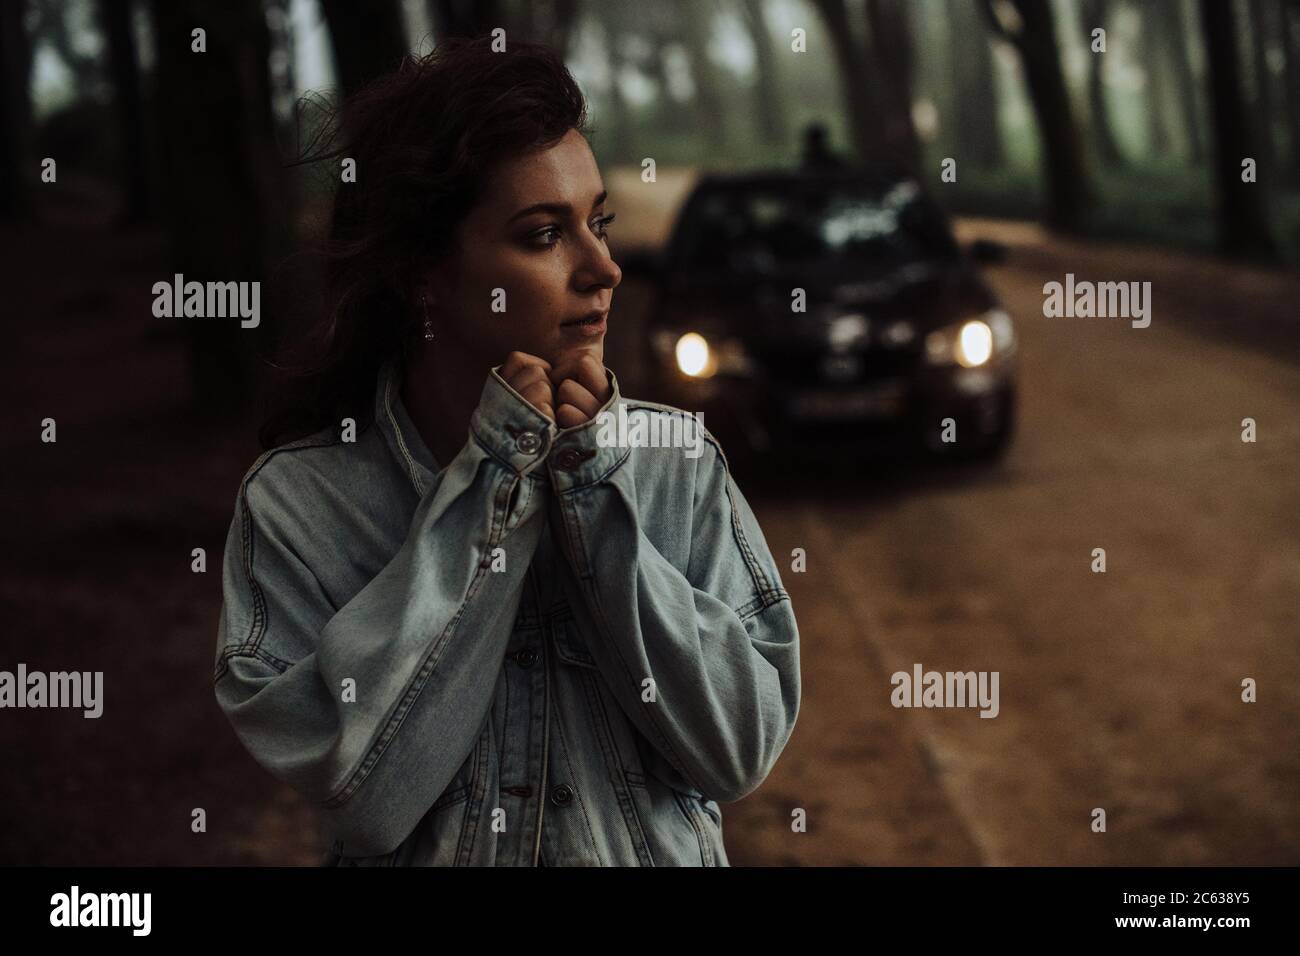 Close up of young woman standing alone in forest with car behind Stock Photo